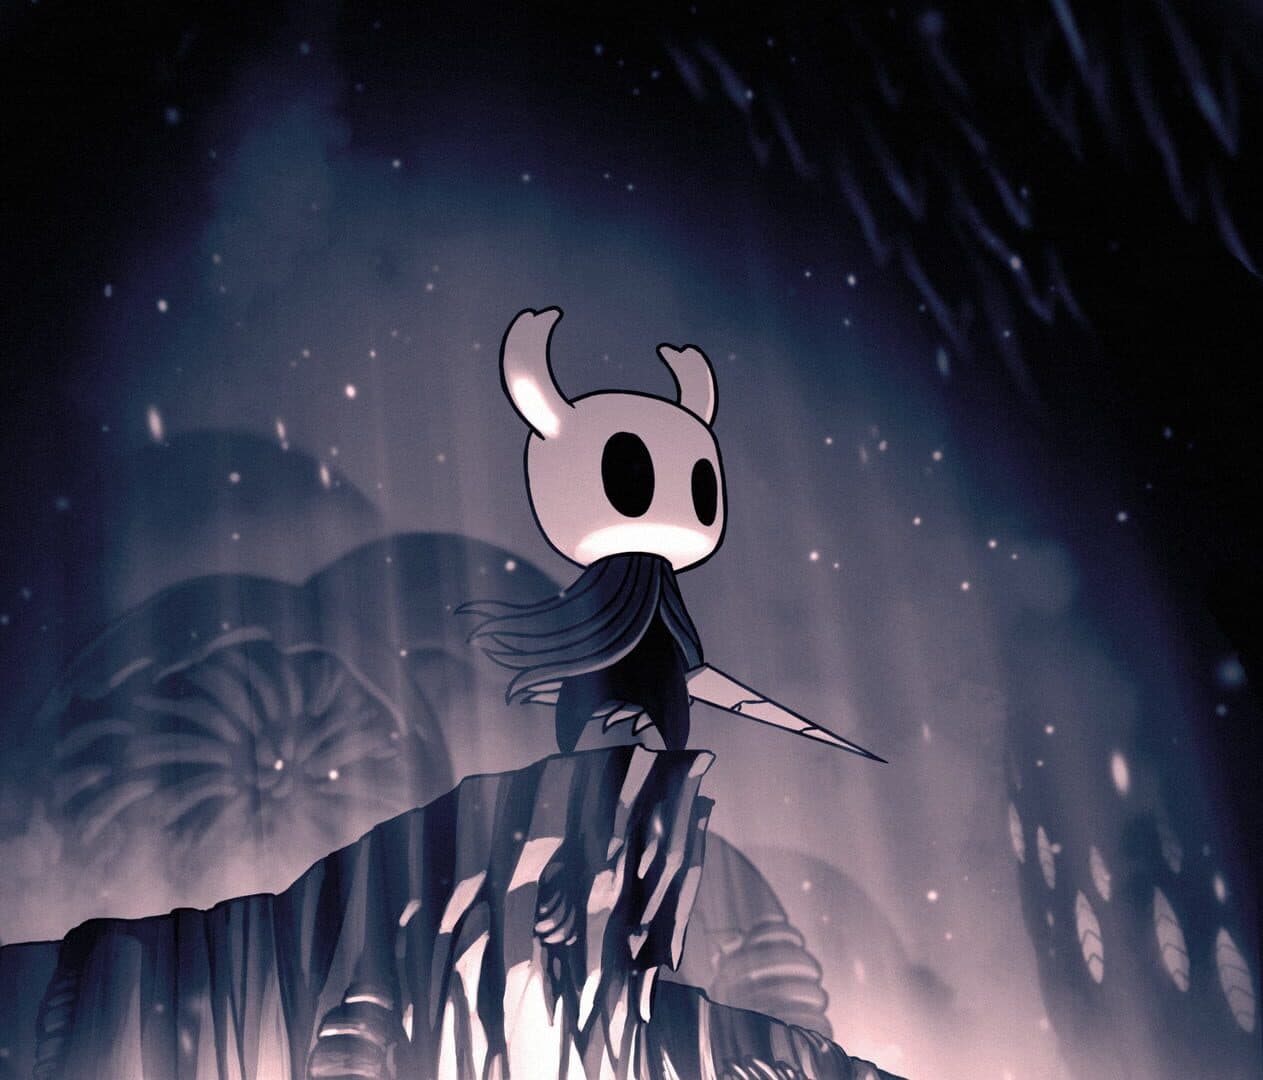 Hollow Knight Image